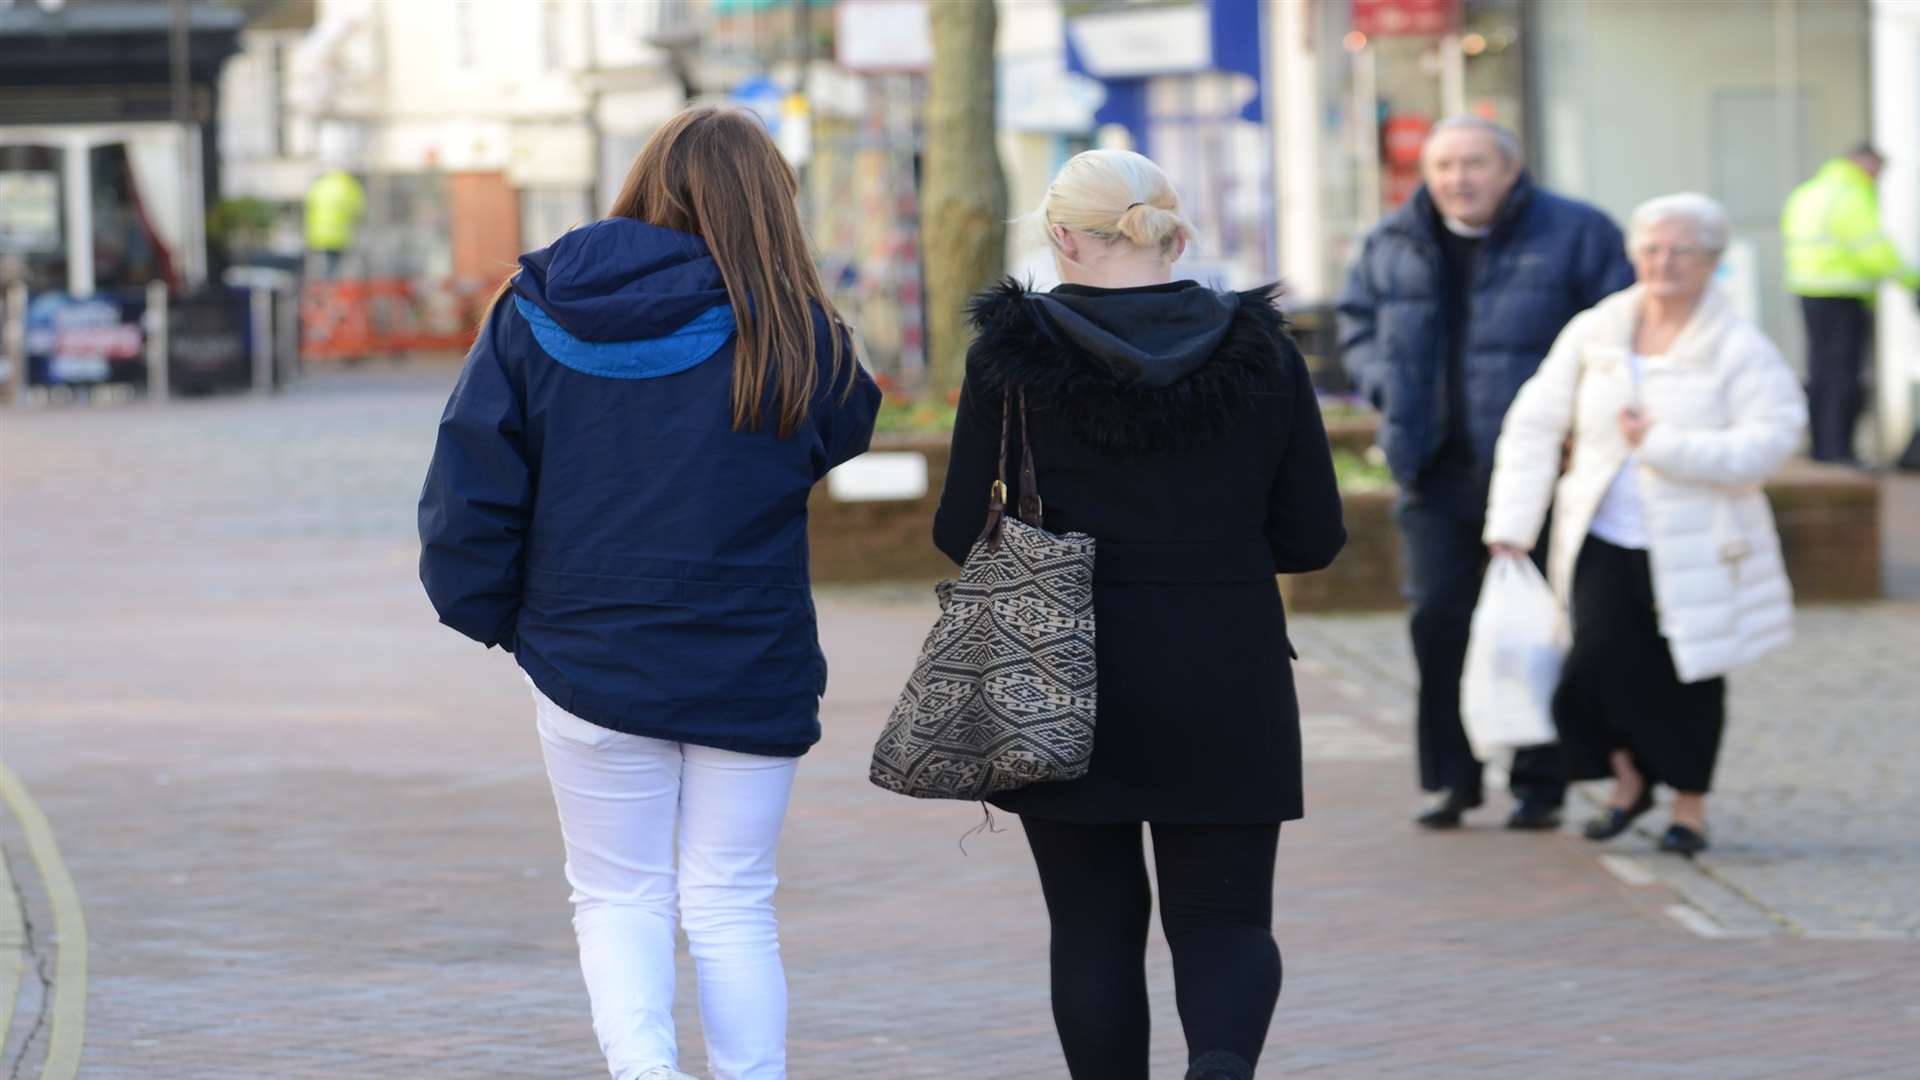 KE reporter Vicky Castle with undercover agent looking for illicit cigarettes in Ashford town centre